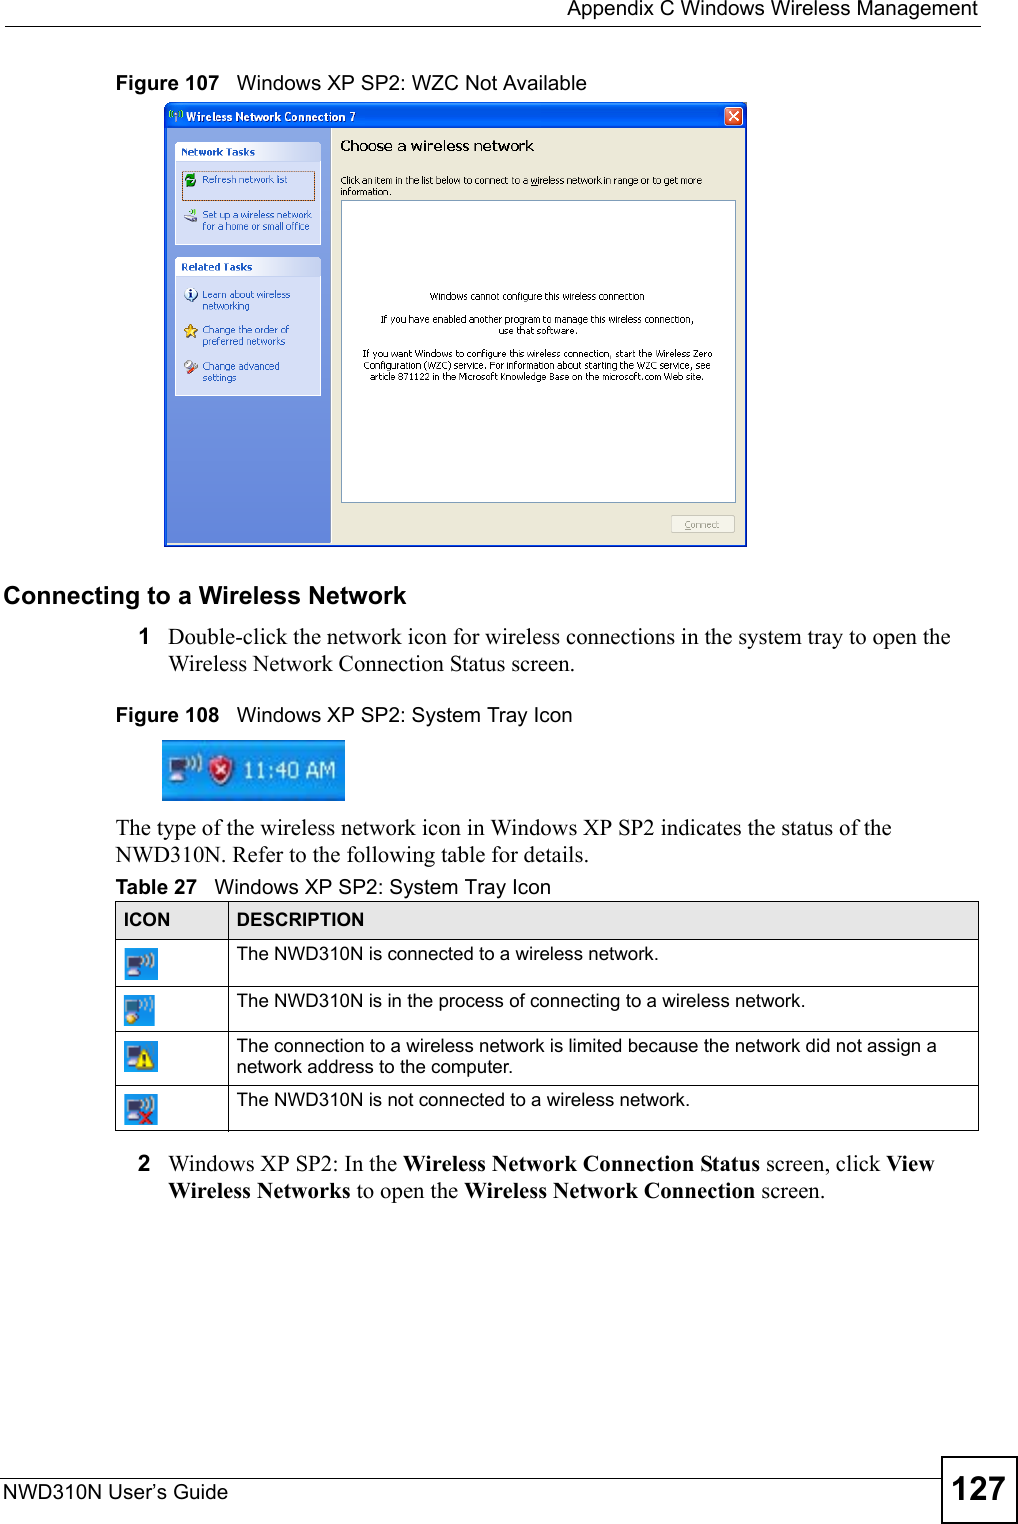  Appendix C Windows Wireless ManagementNWD310N User’s Guide 127Figure 107   Windows XP SP2: WZC Not AvailableConnecting to a Wireless Network 1Double-click the network icon for wireless connections in the system tray to open the Wireless Network Connection Status screen.Figure 108   Windows XP SP2: System Tray IconThe type of the wireless network icon in Windows XP SP2 indicates the status of the NWD310N. Refer to the following table for details.2Windows XP SP2: In the Wireless Network Connection Status screen, click View Wireless Networks to open the Wireless Network Connection screen.Table 27   Windows XP SP2: System Tray IconICON DESCRIPTIONThe NWD310N is connected to a wireless network.The NWD310N is in the process of connecting to a wireless network.The connection to a wireless network is limited because the network did not assign a network address to the computer.The NWD310N is not connected to a wireless network.